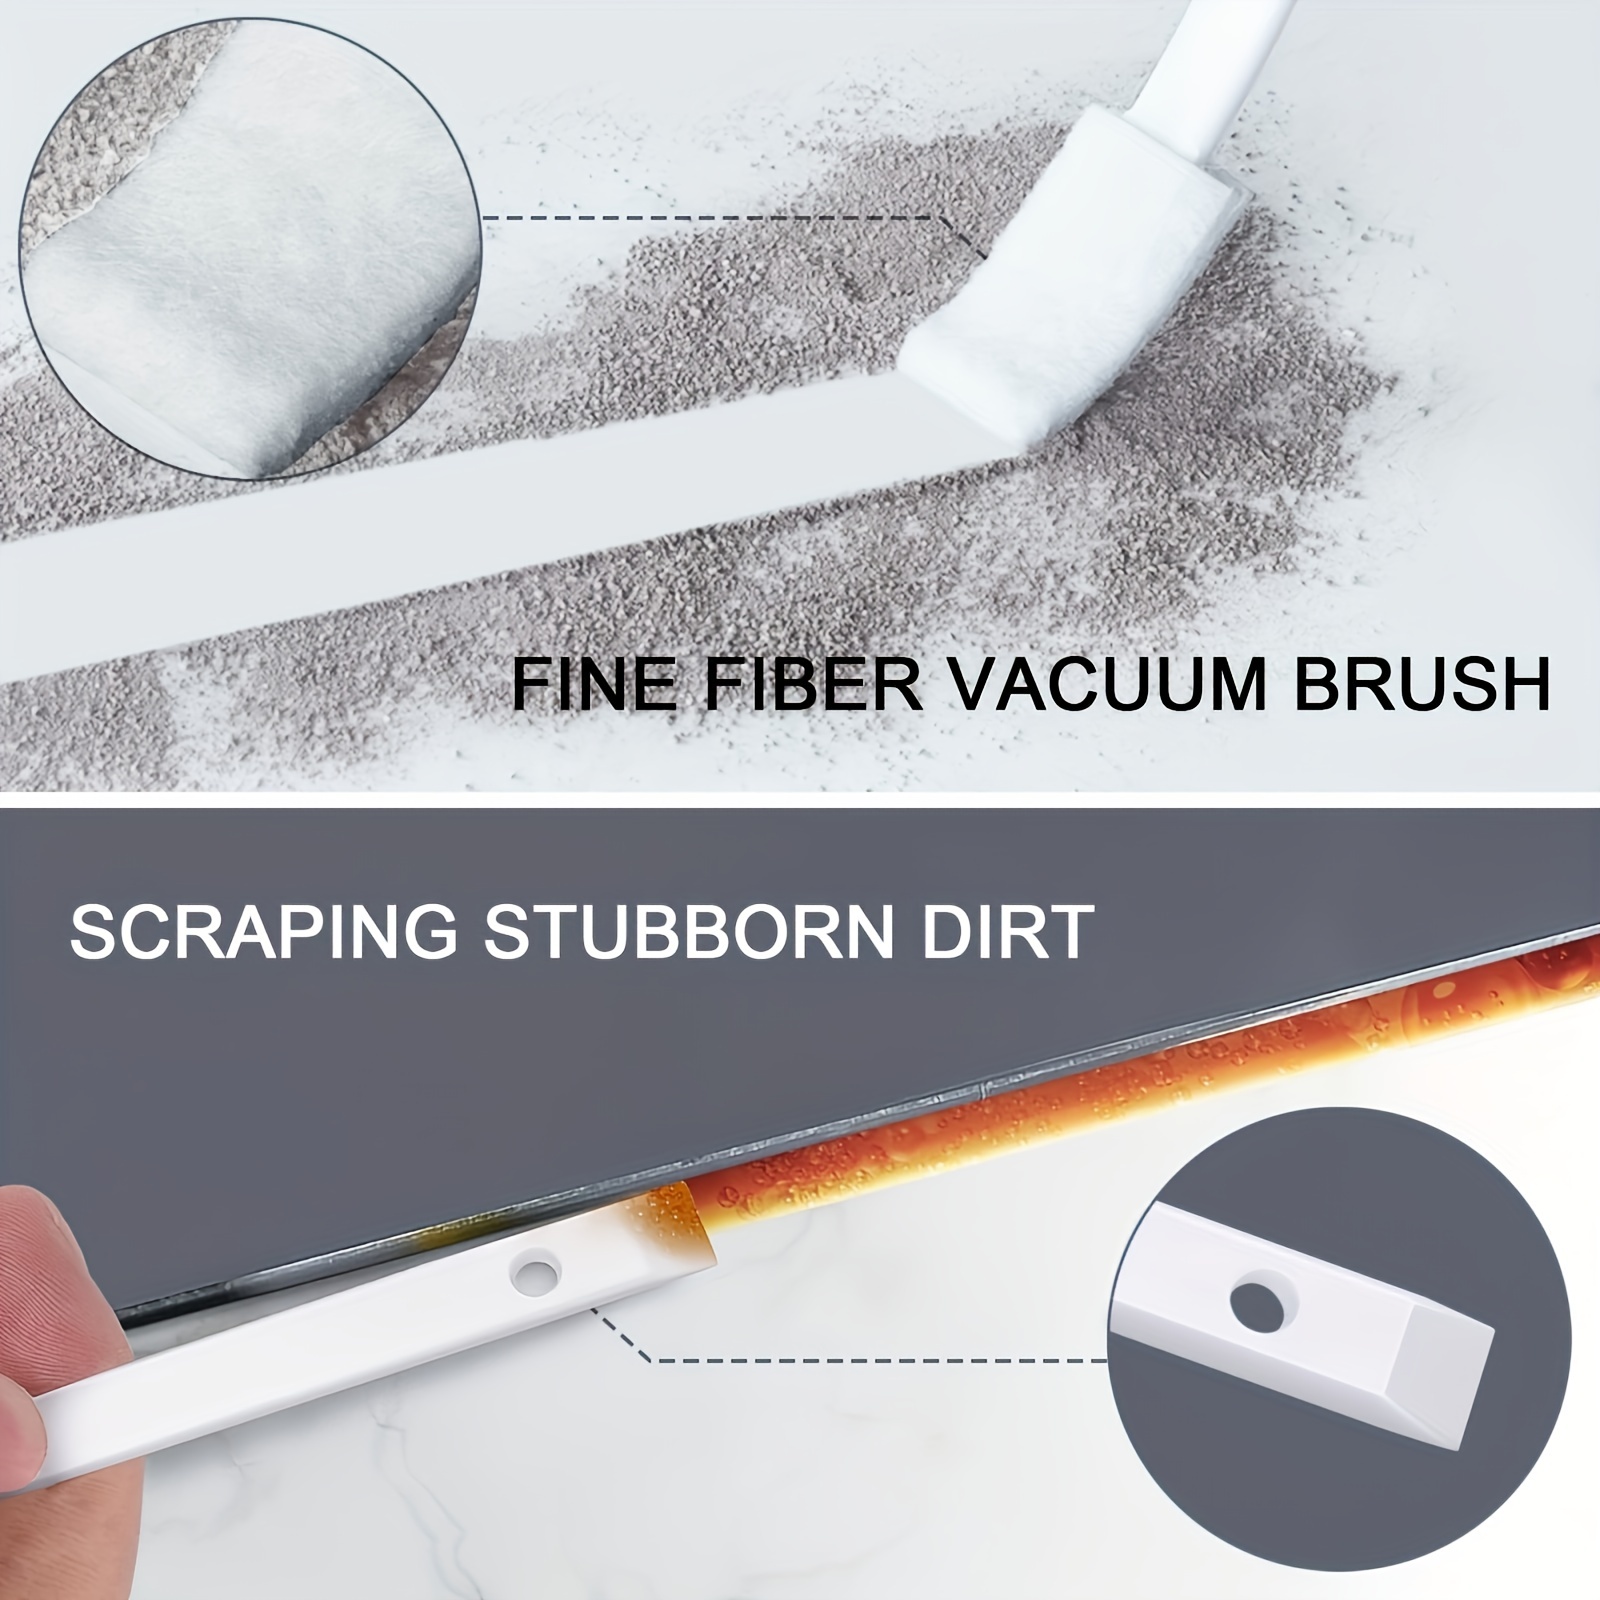 Small Disposable Crevice Cleaning Brushes, For Toilet Corner